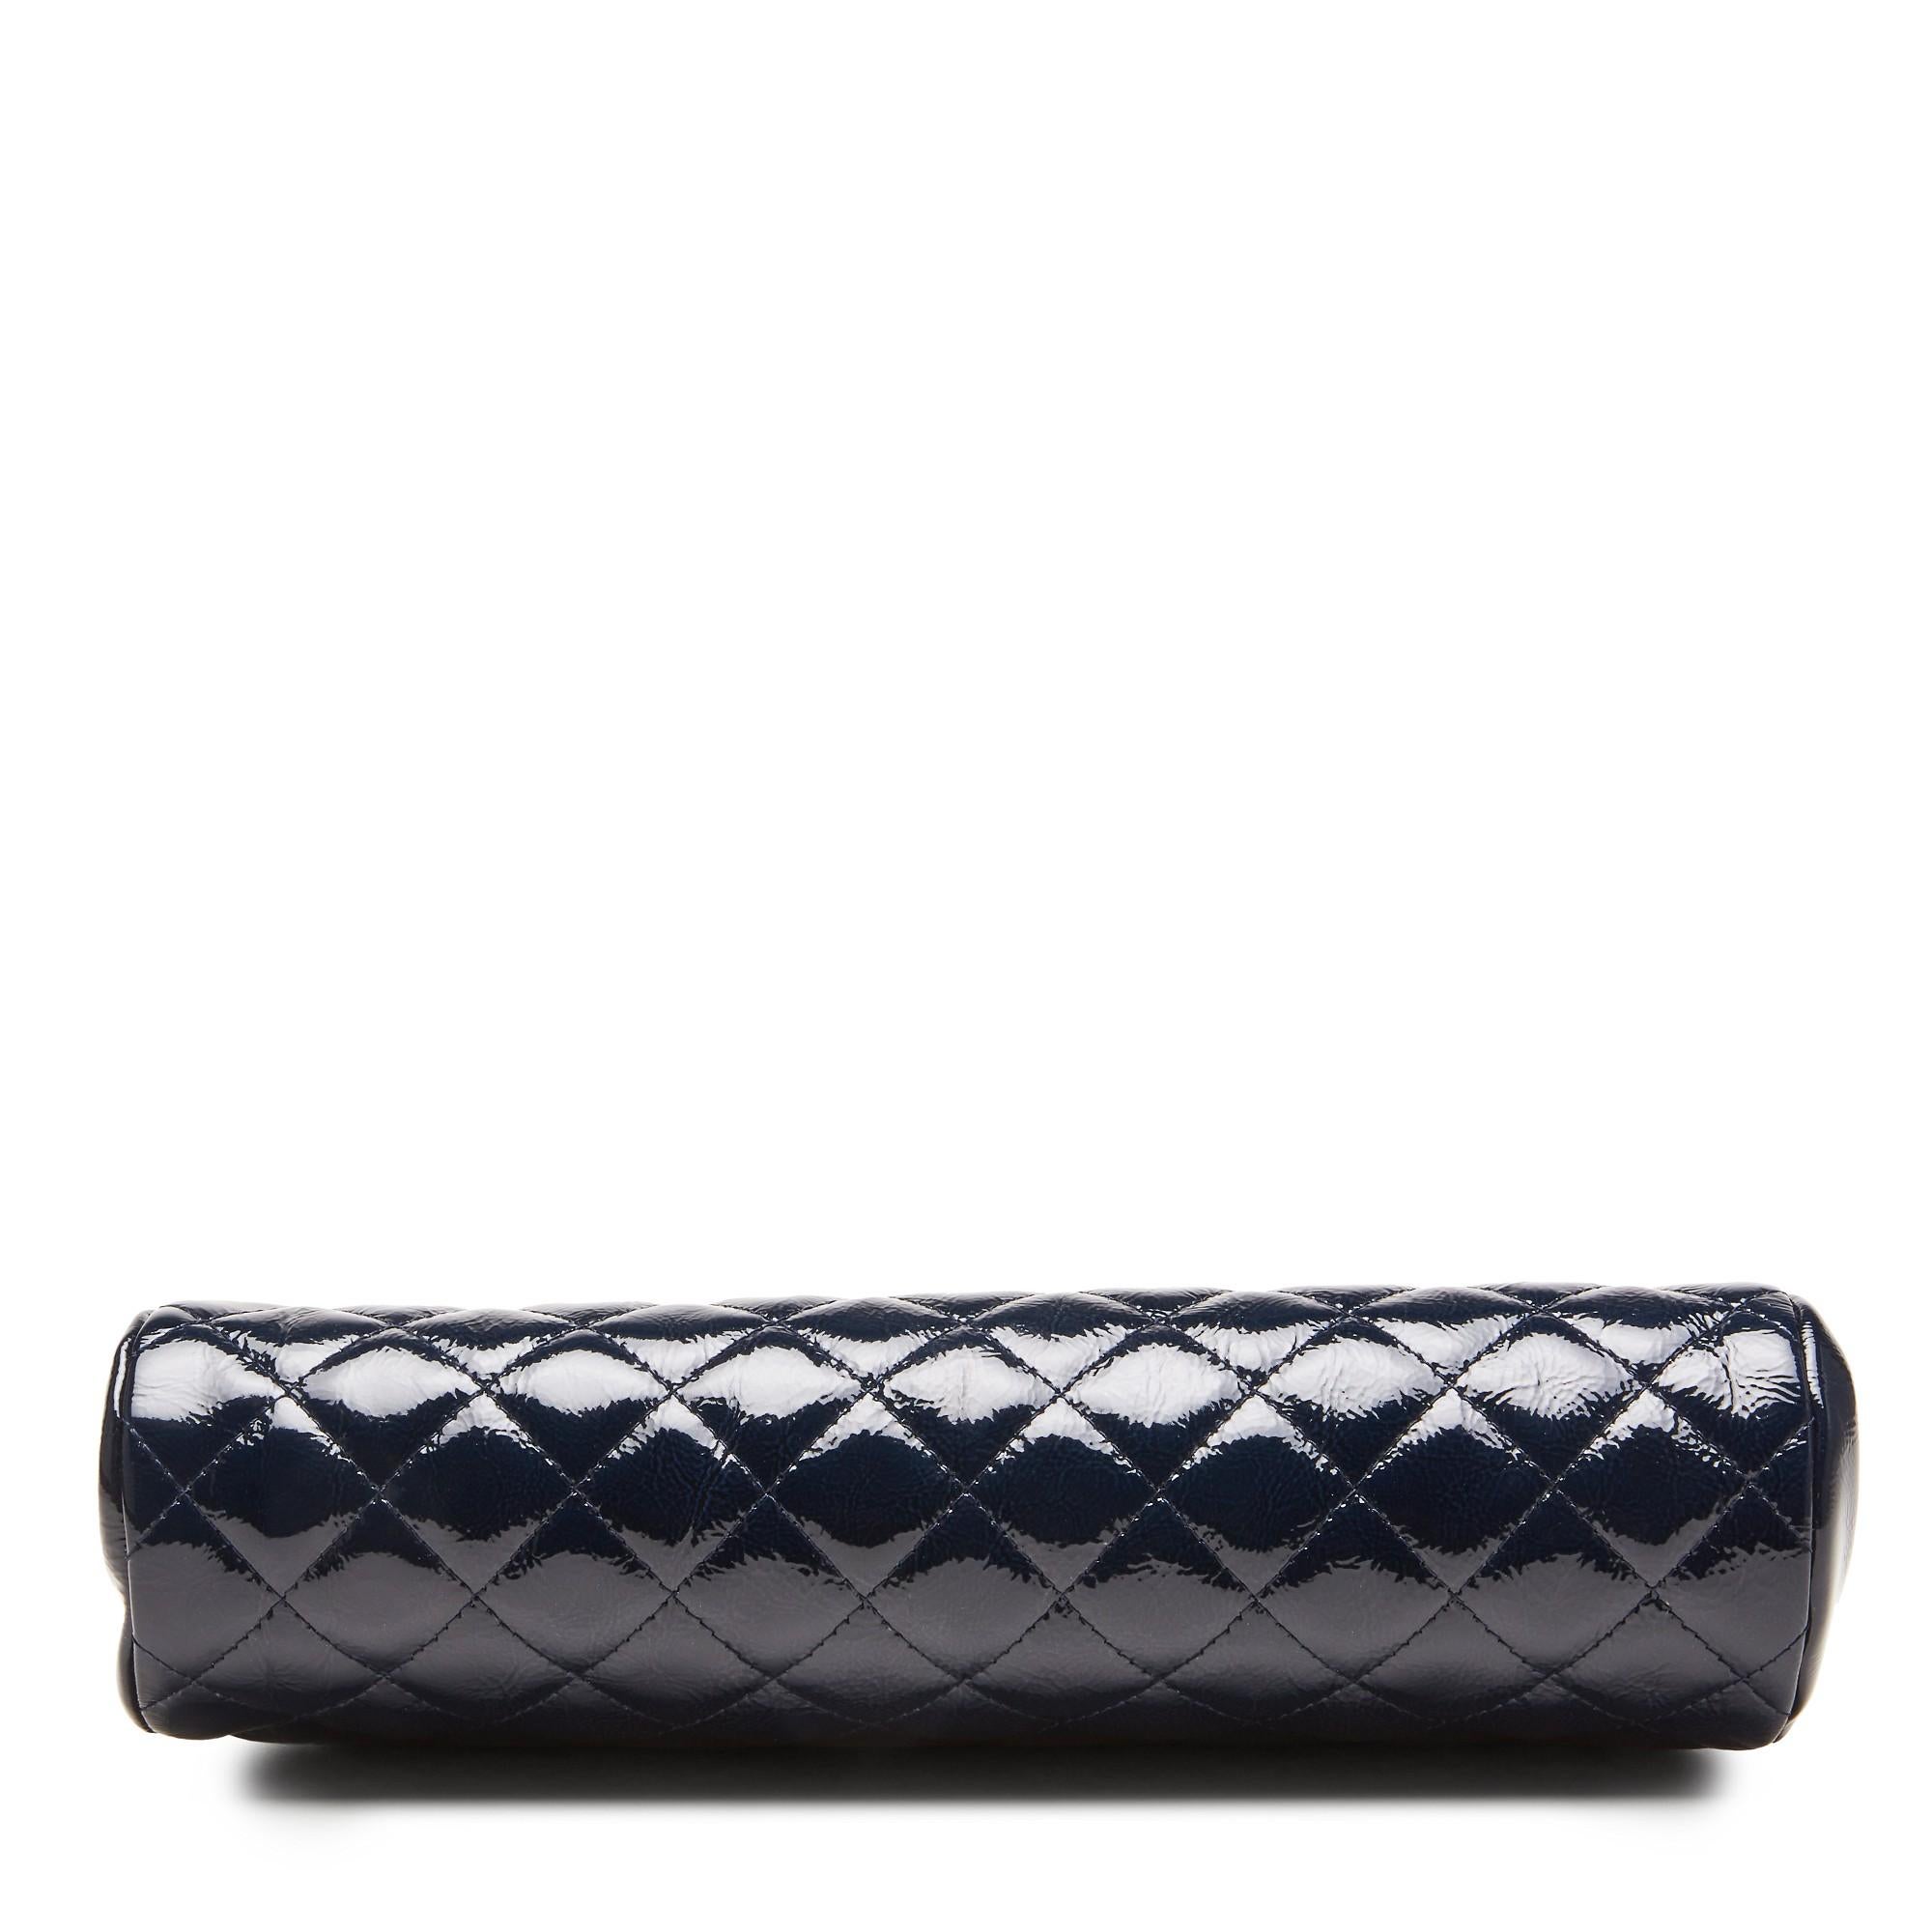 Chanel 2007 Classic Vintage Navy Blue Patent Diamond Quilted Timeless Clutch Bag For Sale 5